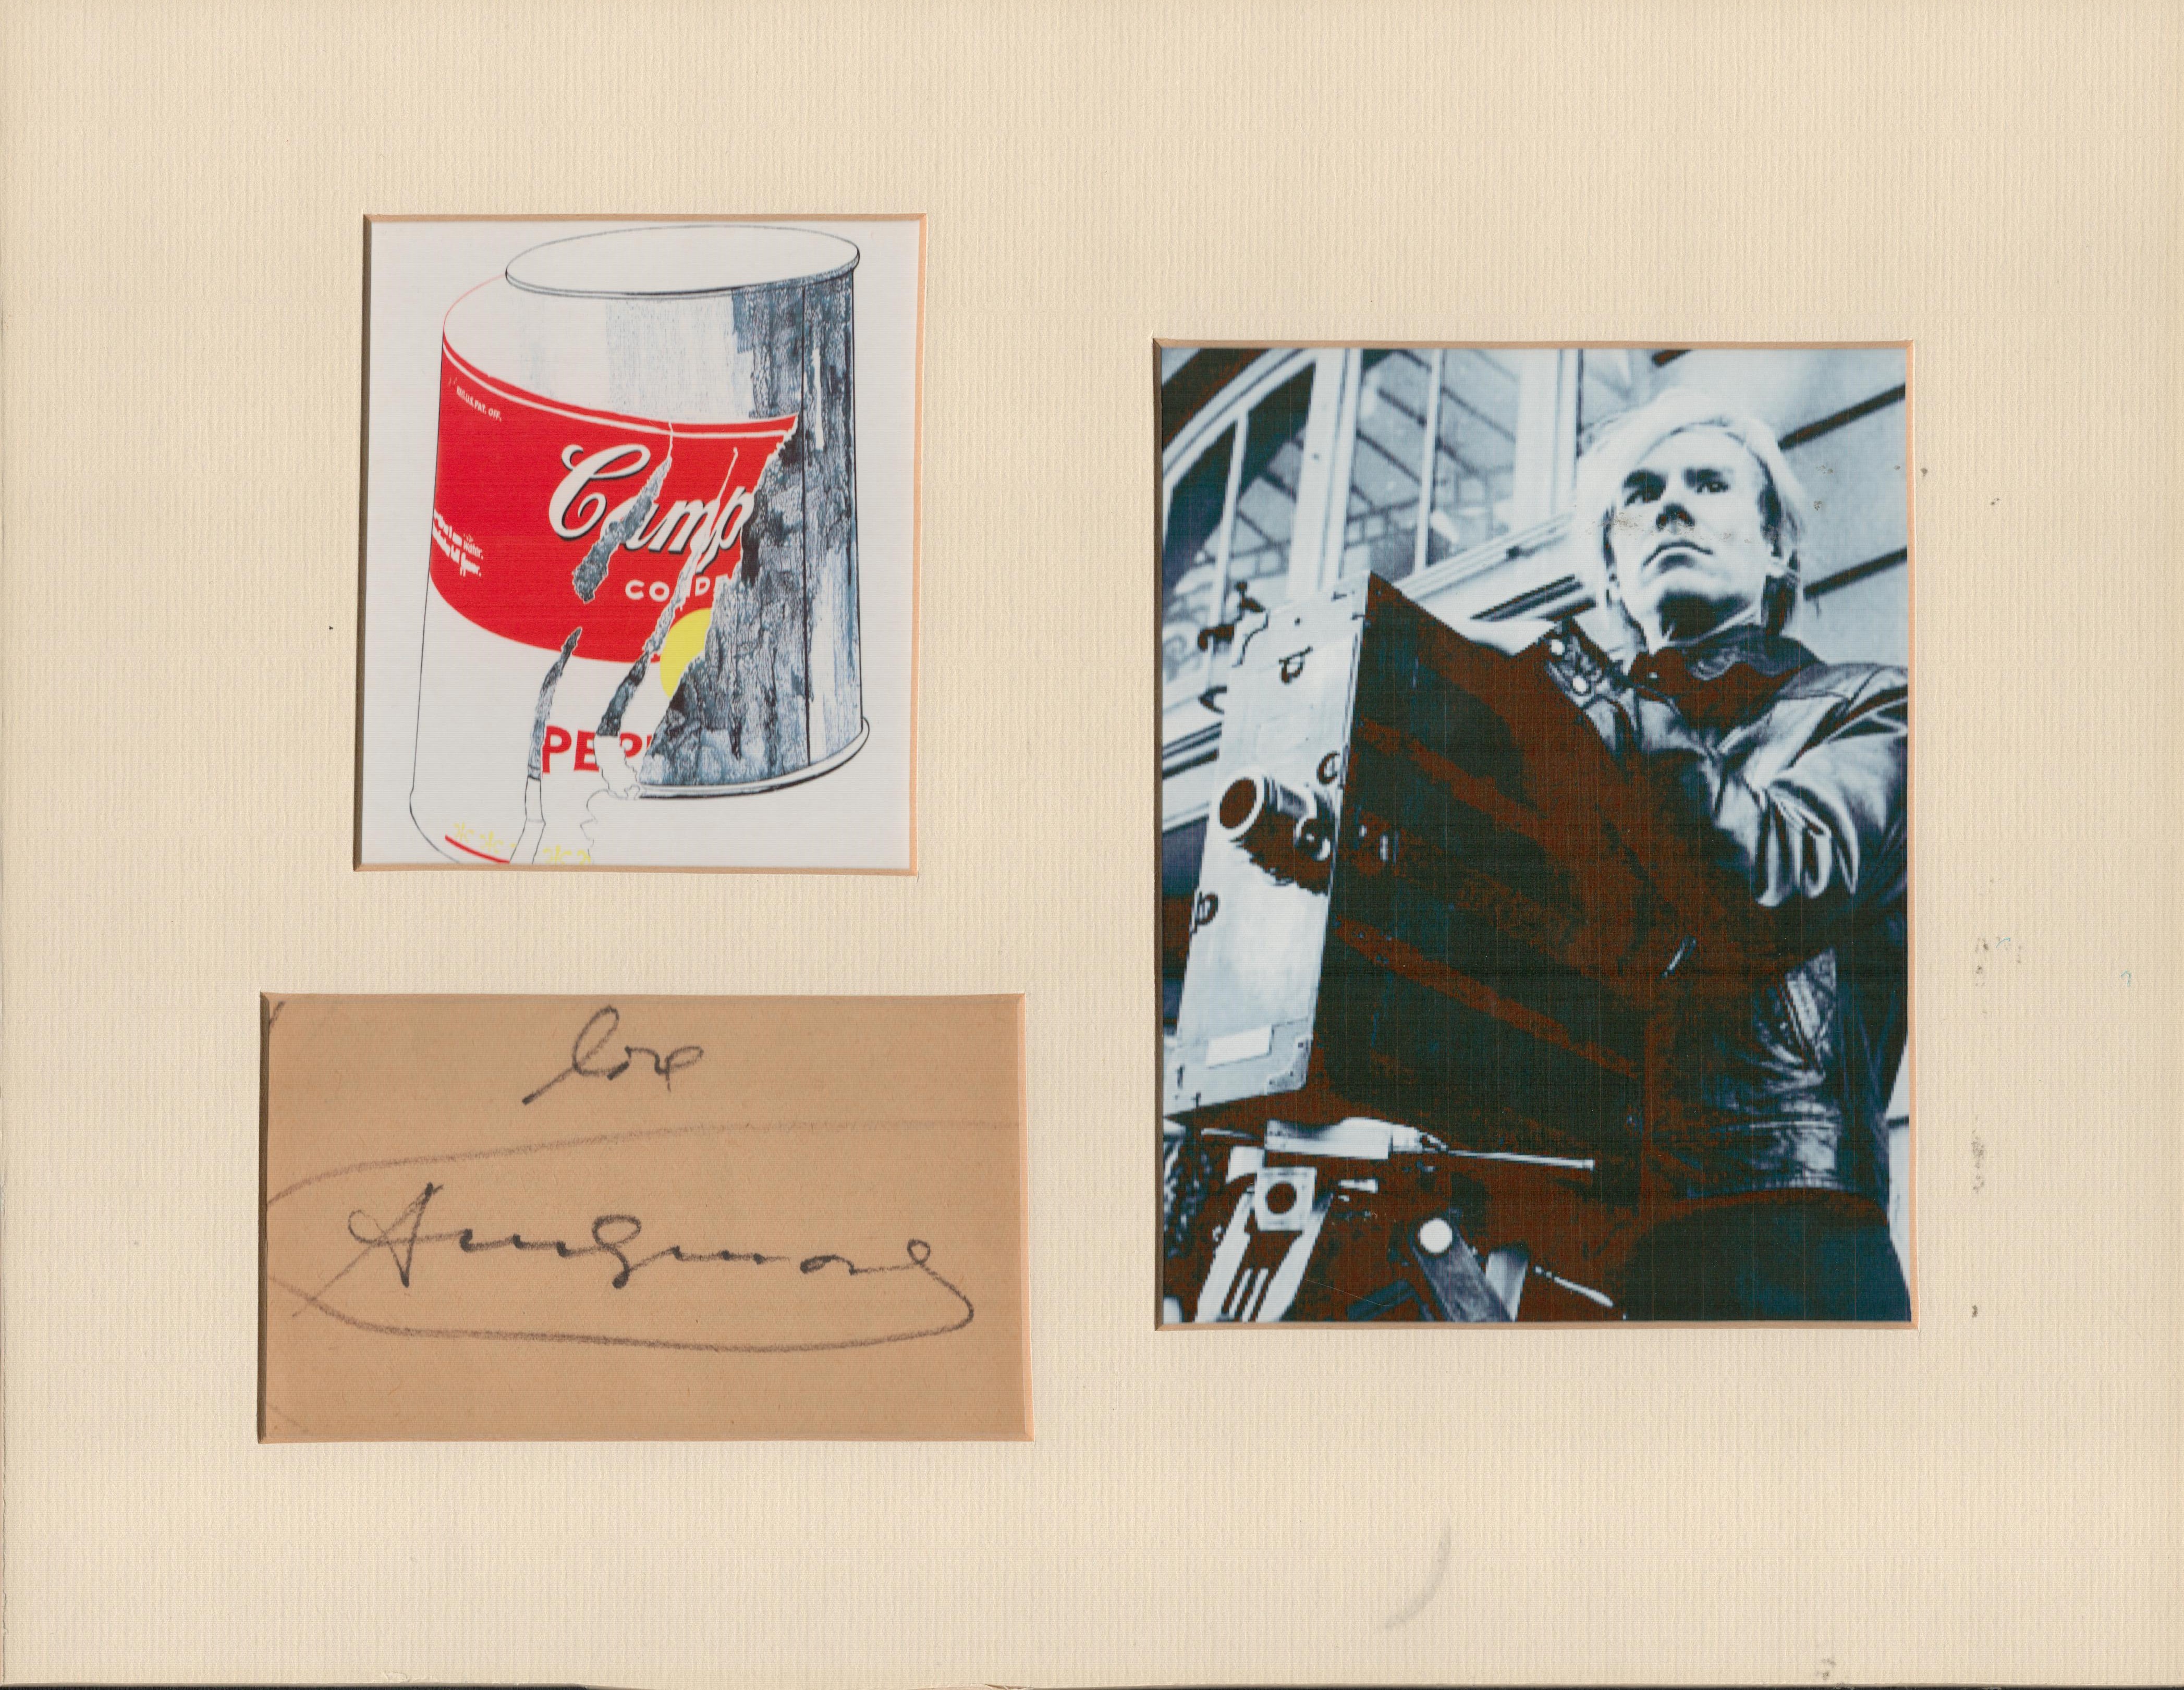 Andy Warhol 14x11 mounted signature piece includes signed album page and photo. Good condition.